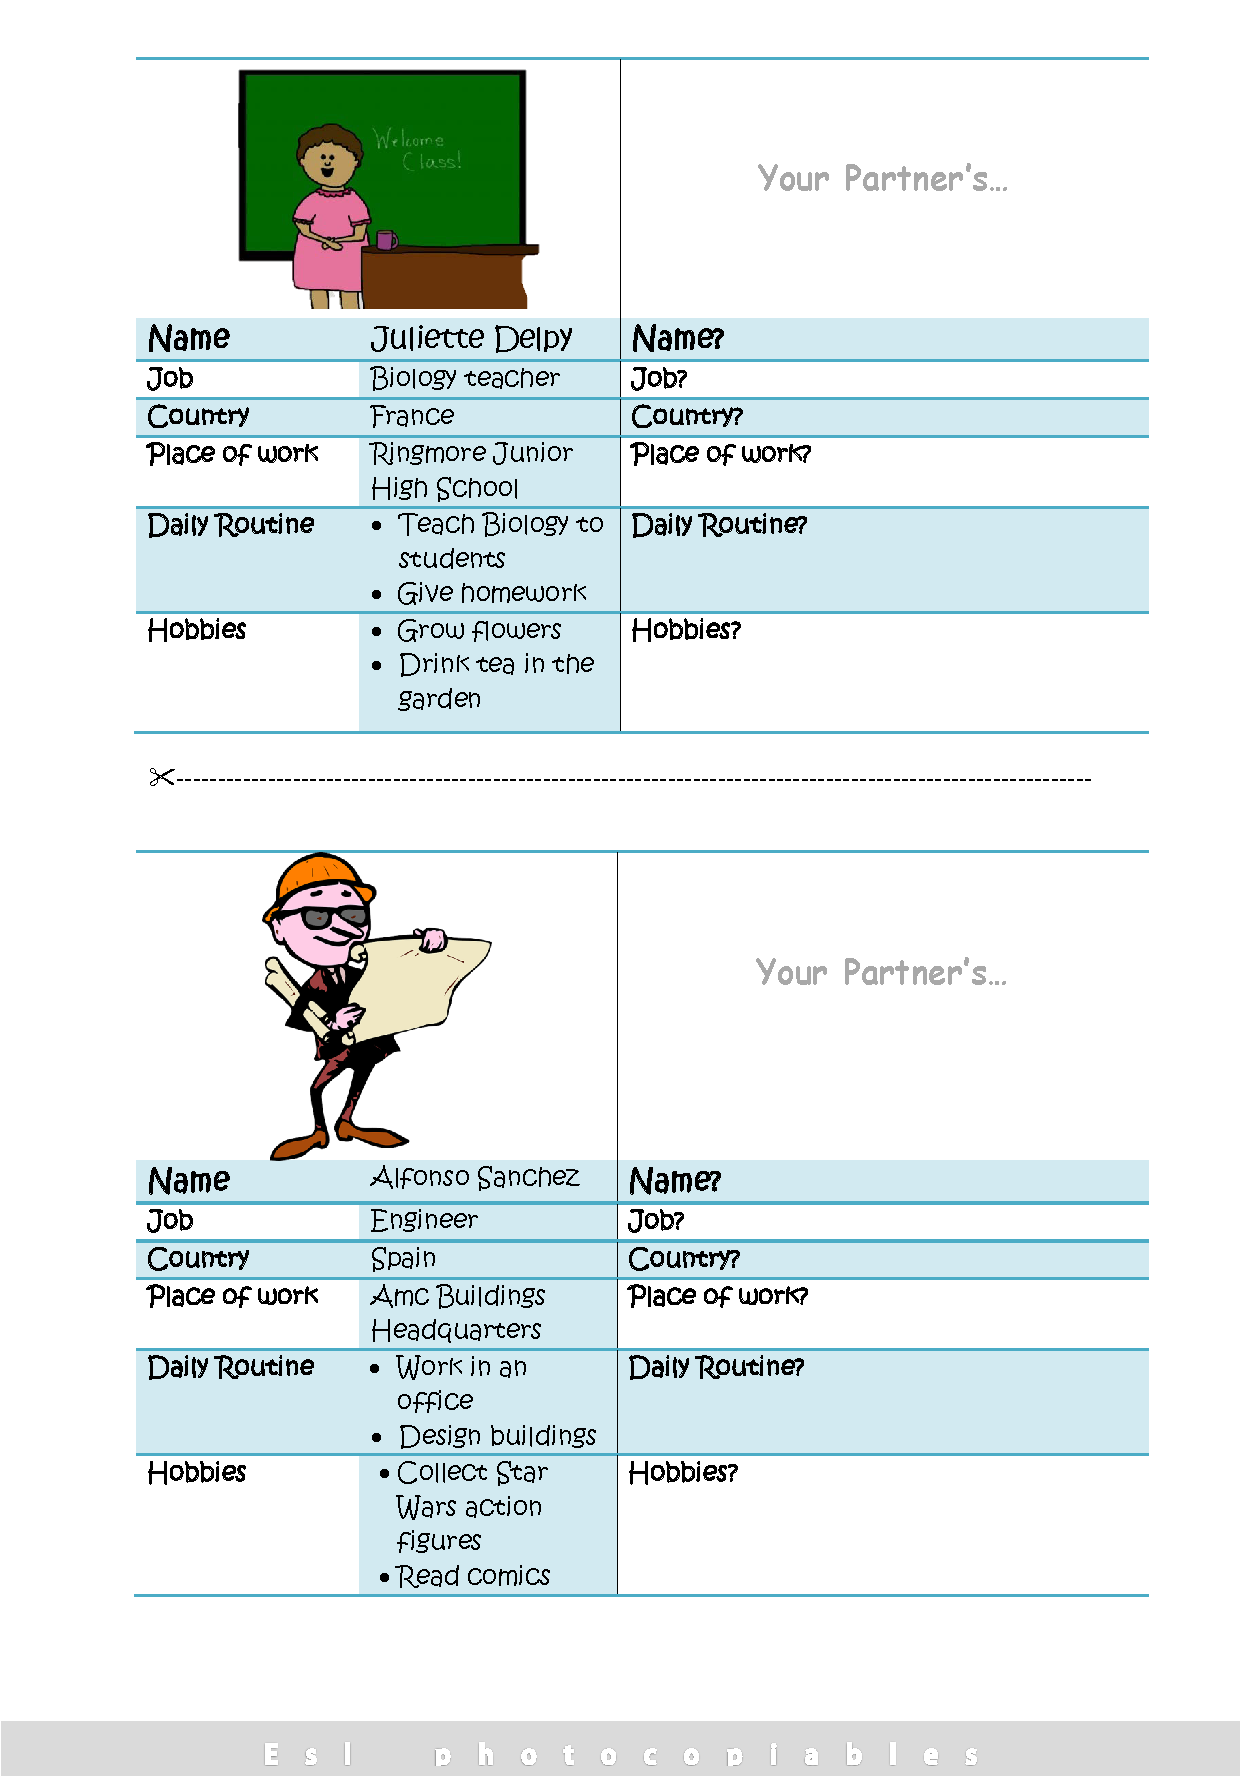 Suggested Activities and Role-plays for Teaching Verb Tenses